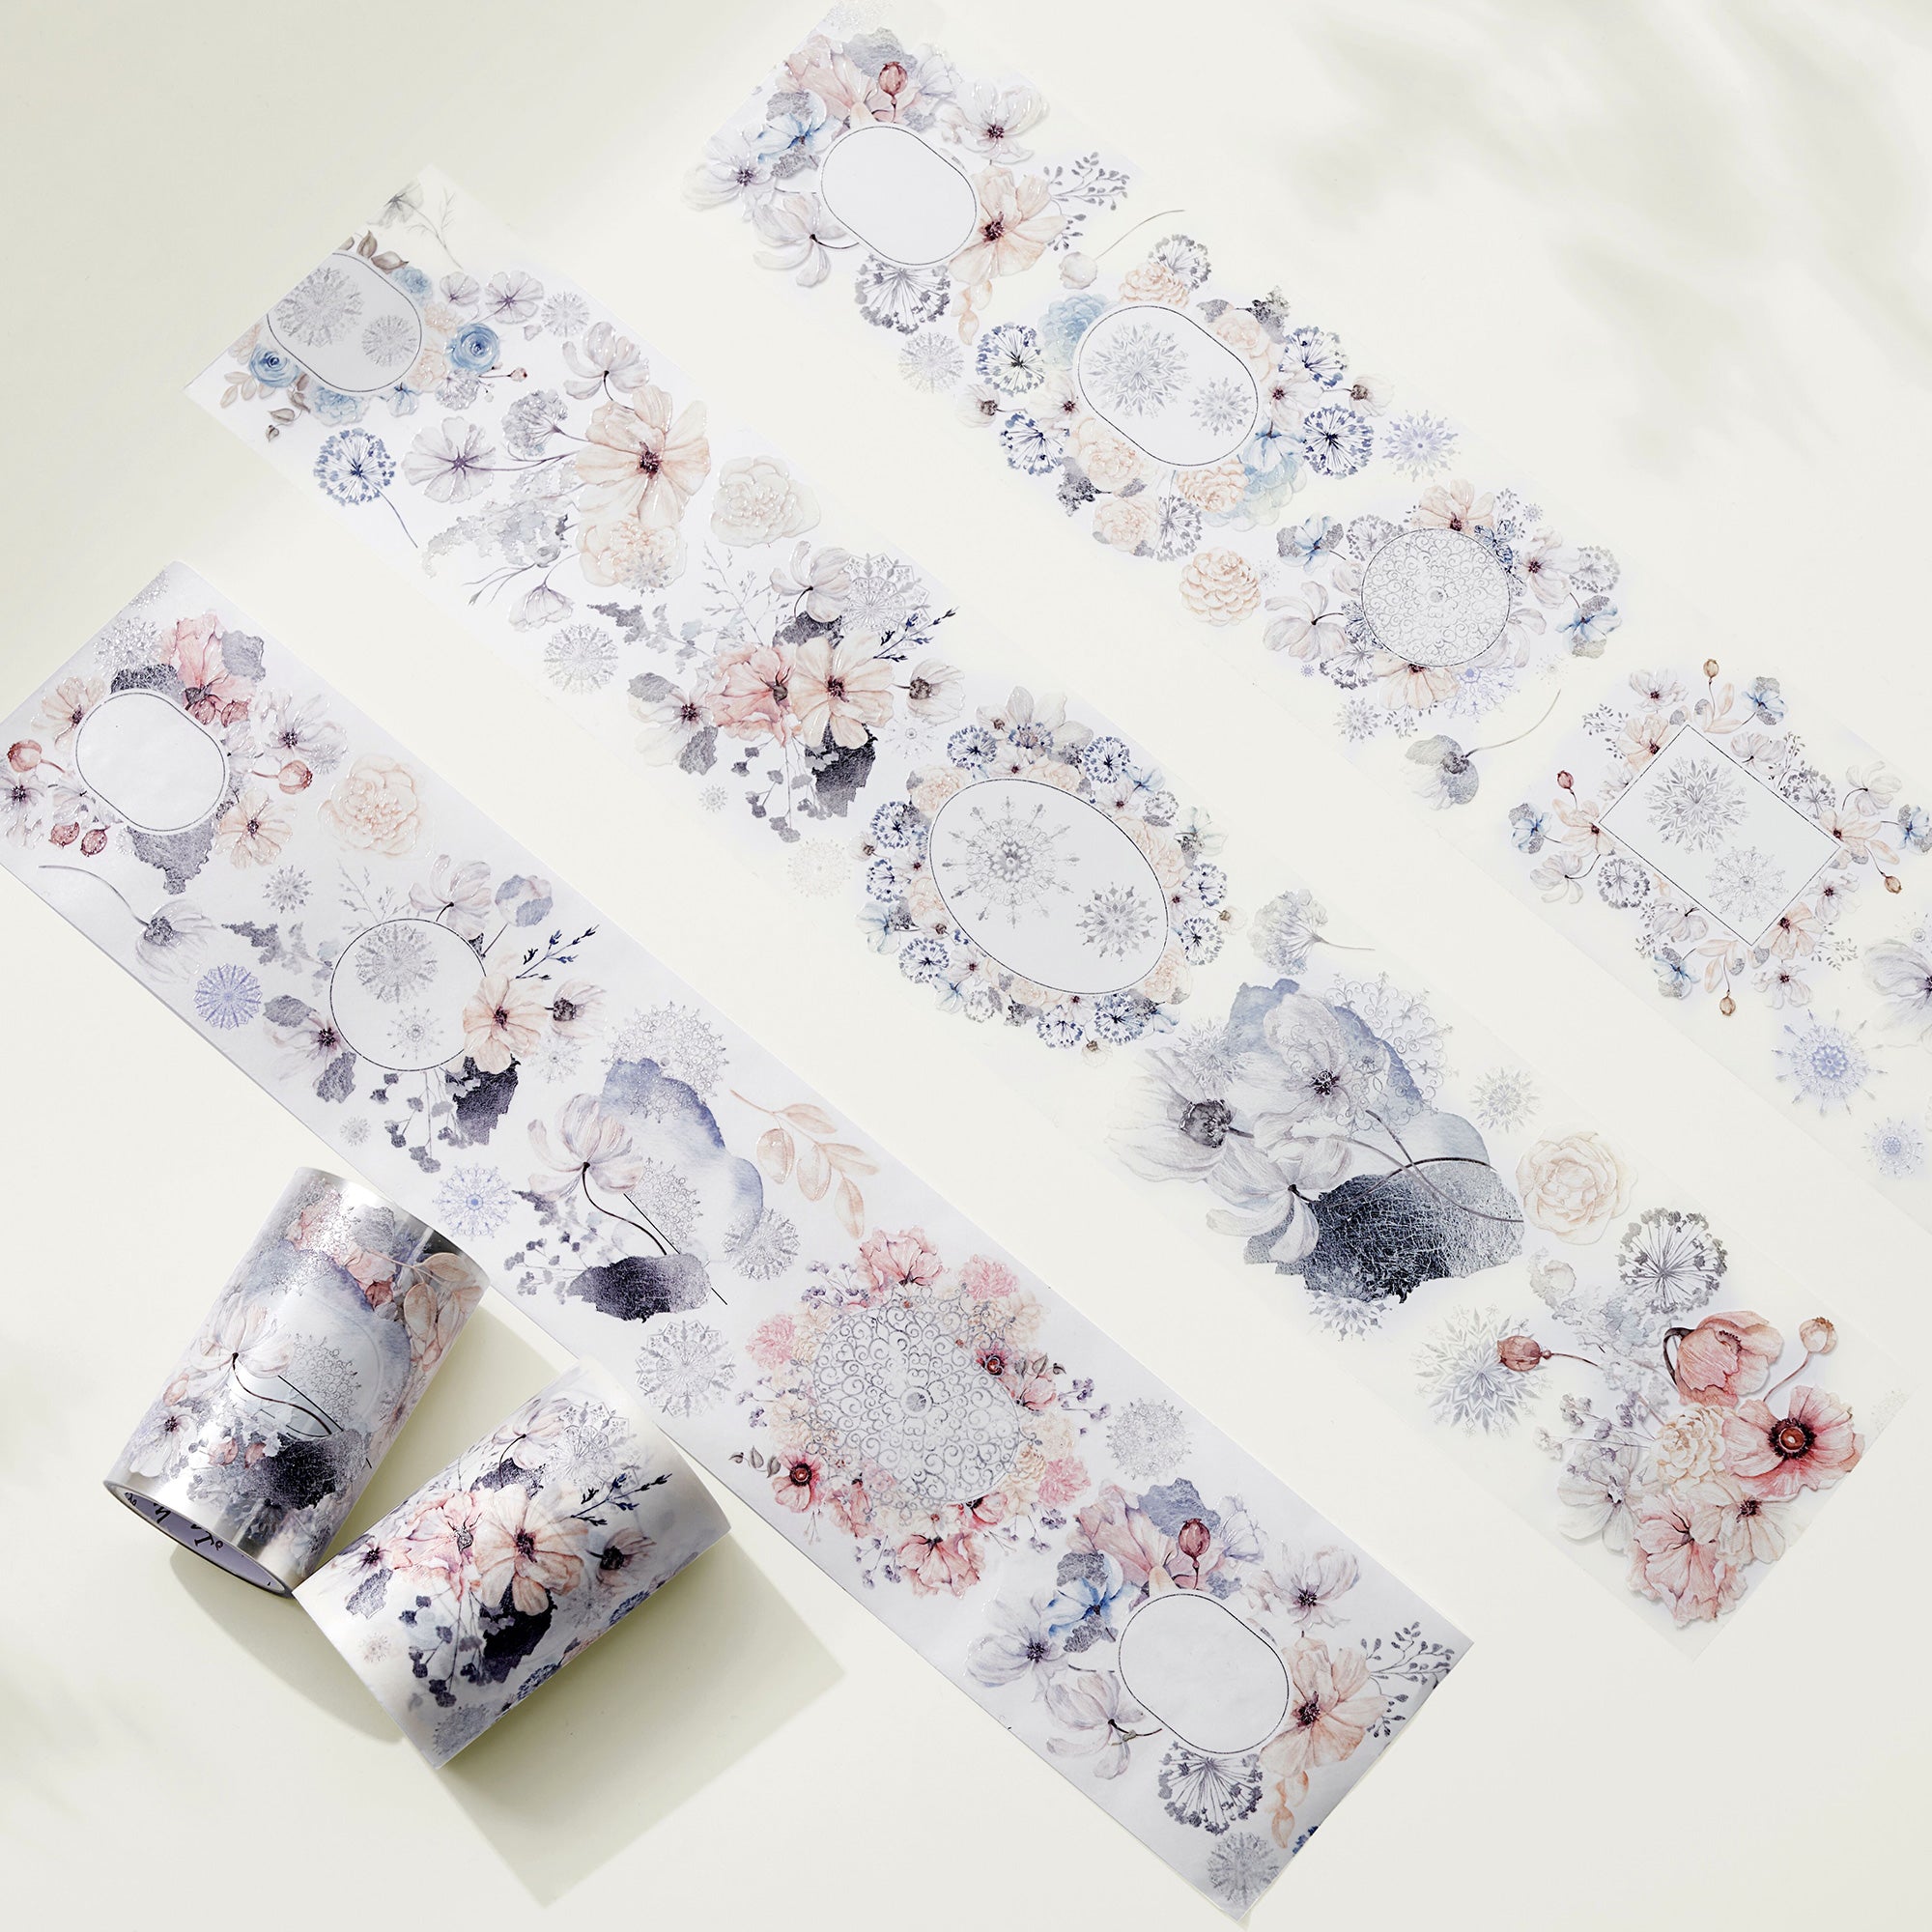 6 Packs: 14 ct. (84 total) Big Bloom Crafting Tape Set by Recollections™